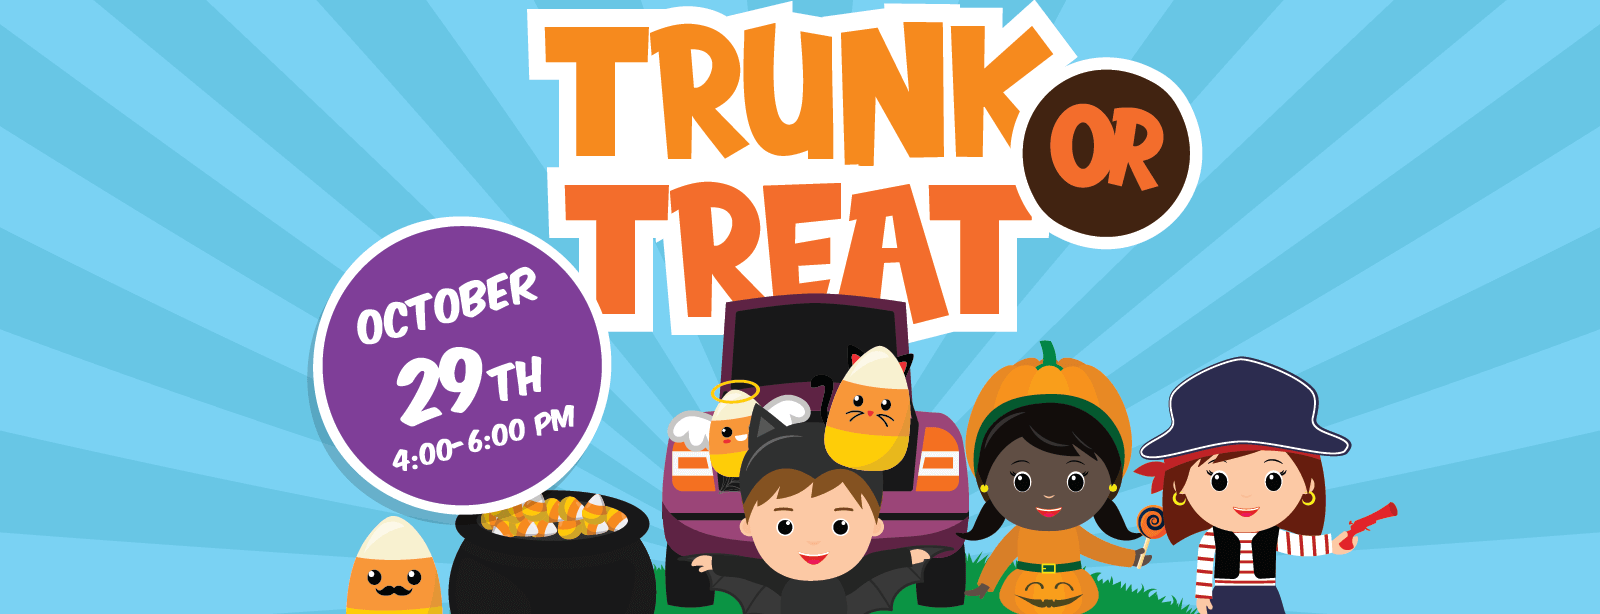 Trunk or Treat October 29th 4:00-6:00